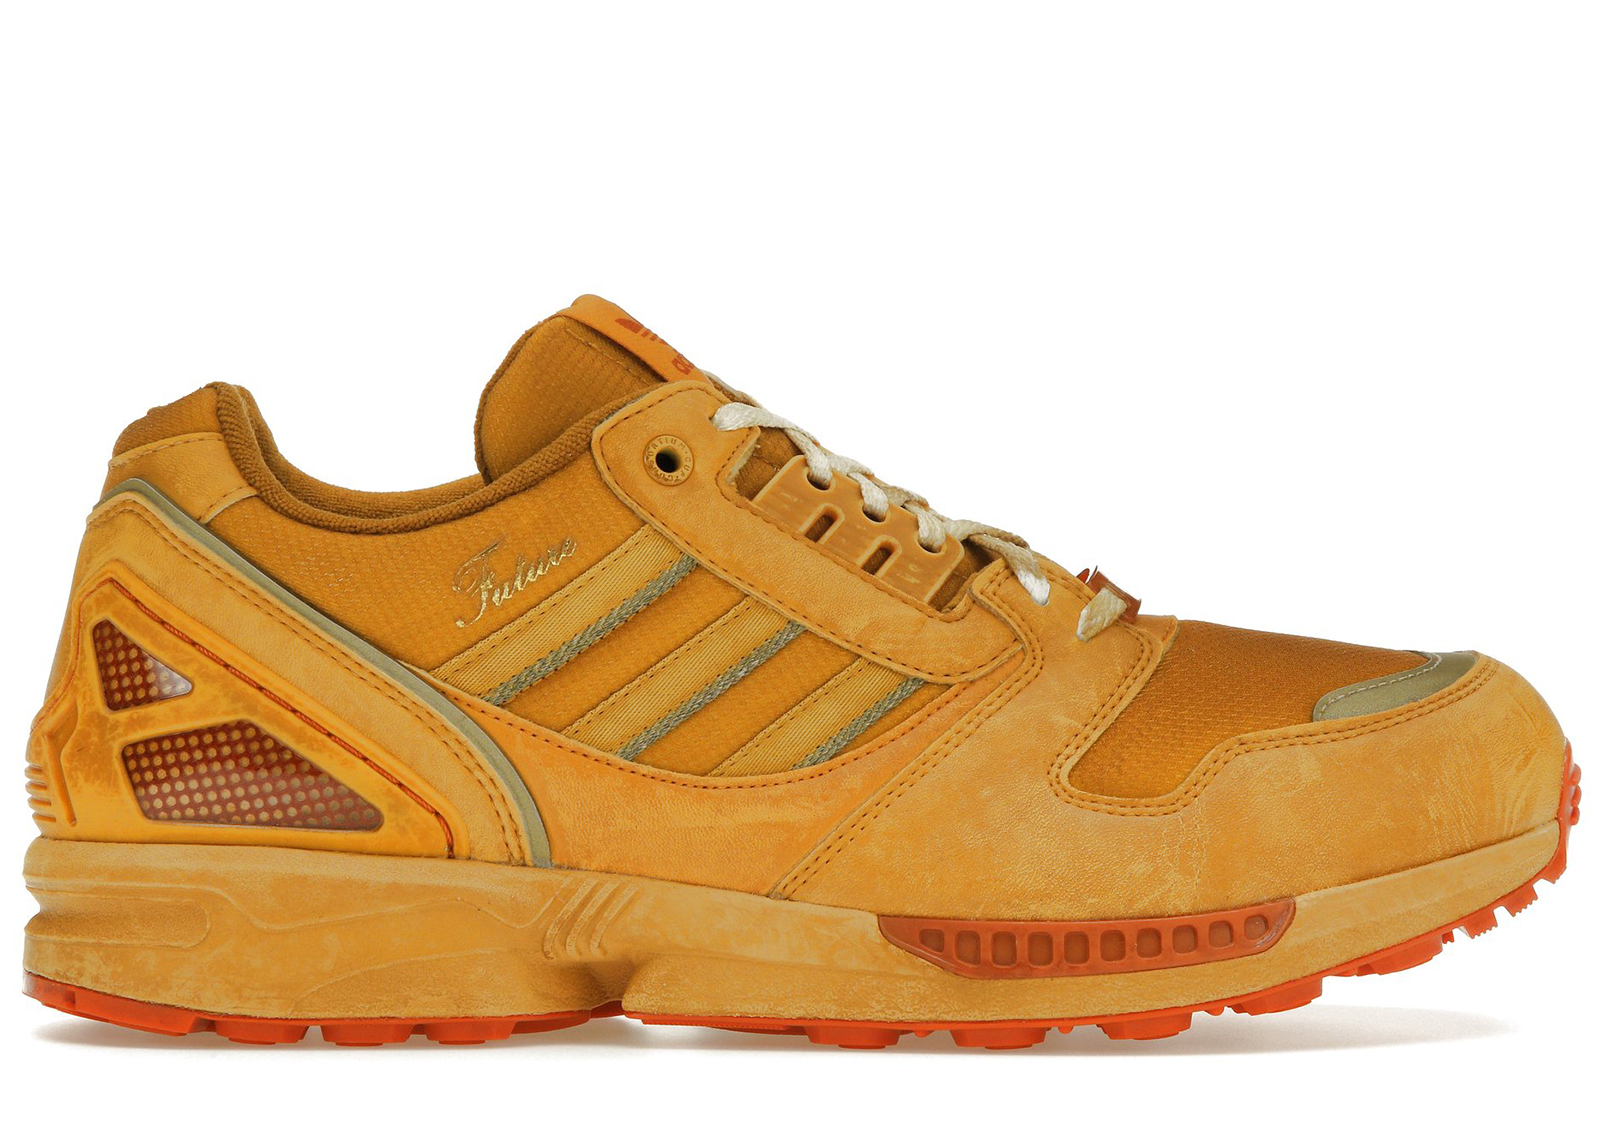 adidas ZX 8000 Consortium Cup END. Future メンズ - IG8562 - JP